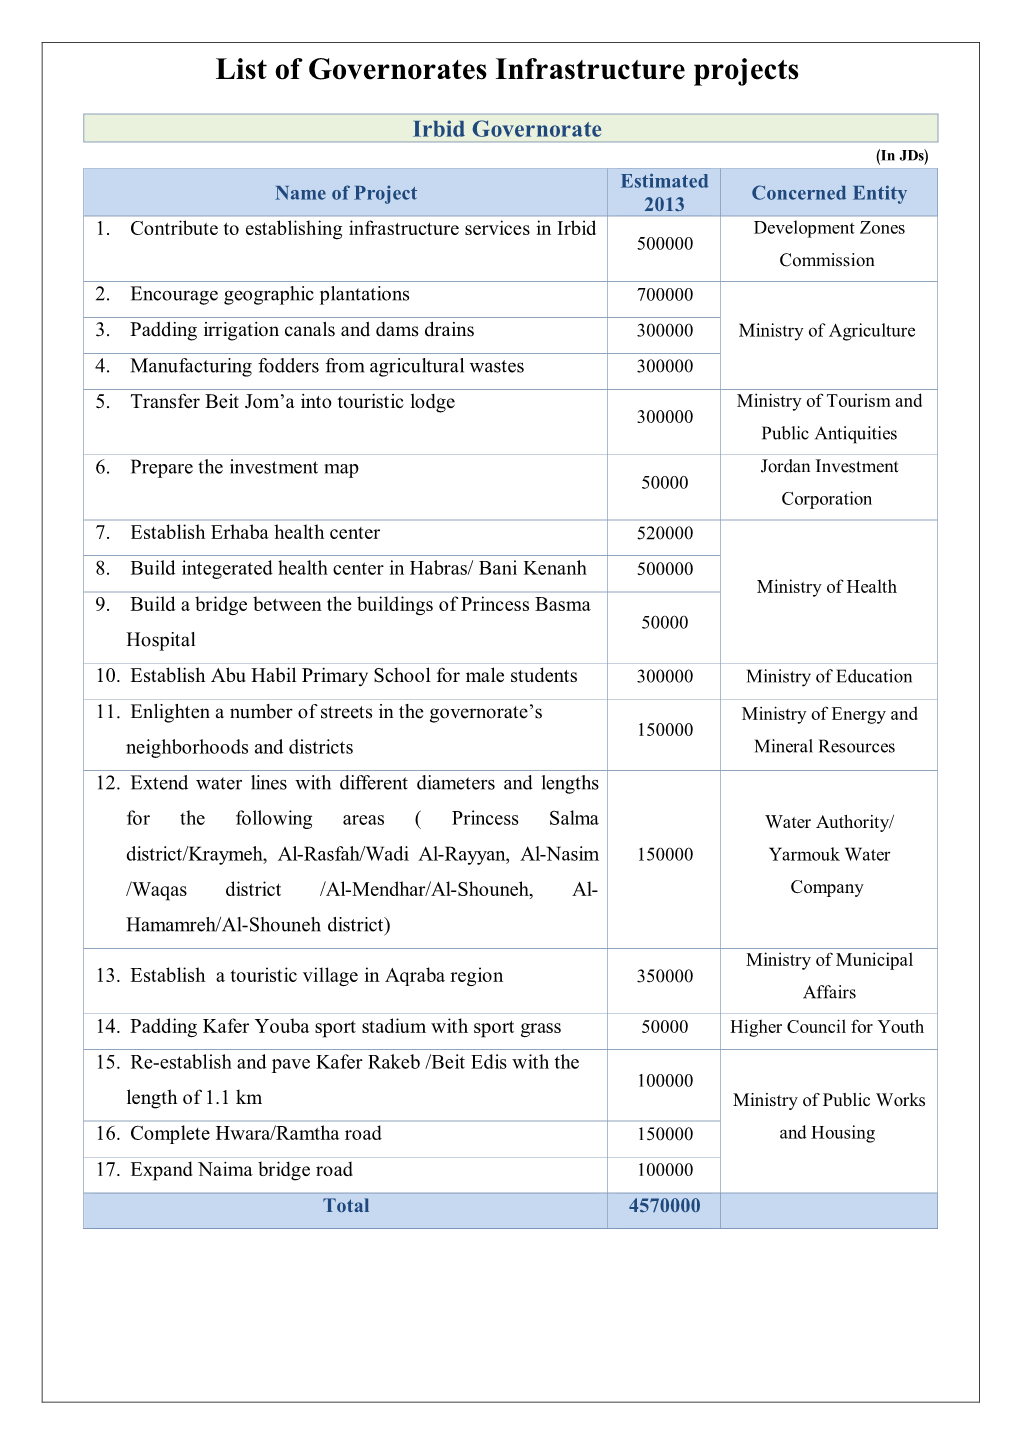 List of Governorates Infrastructure Projects